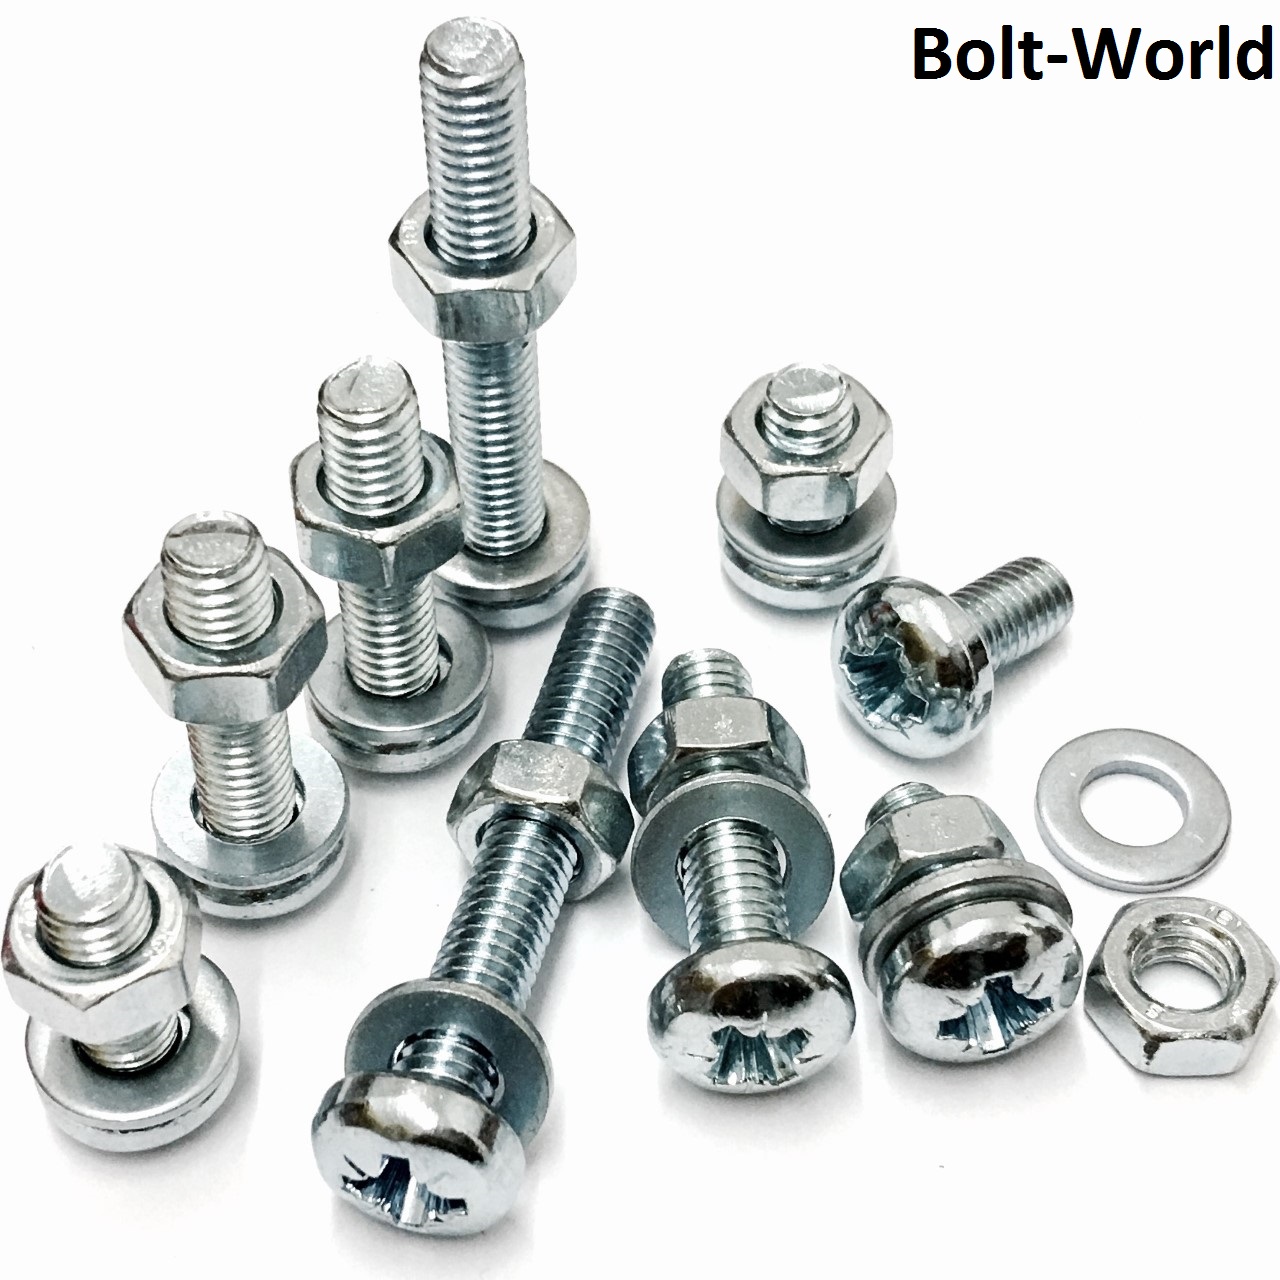 M6 6mm Zinc Machine Pozi Pan Head Screws Bolts With Full Nuts And Thick Washers Ebay 